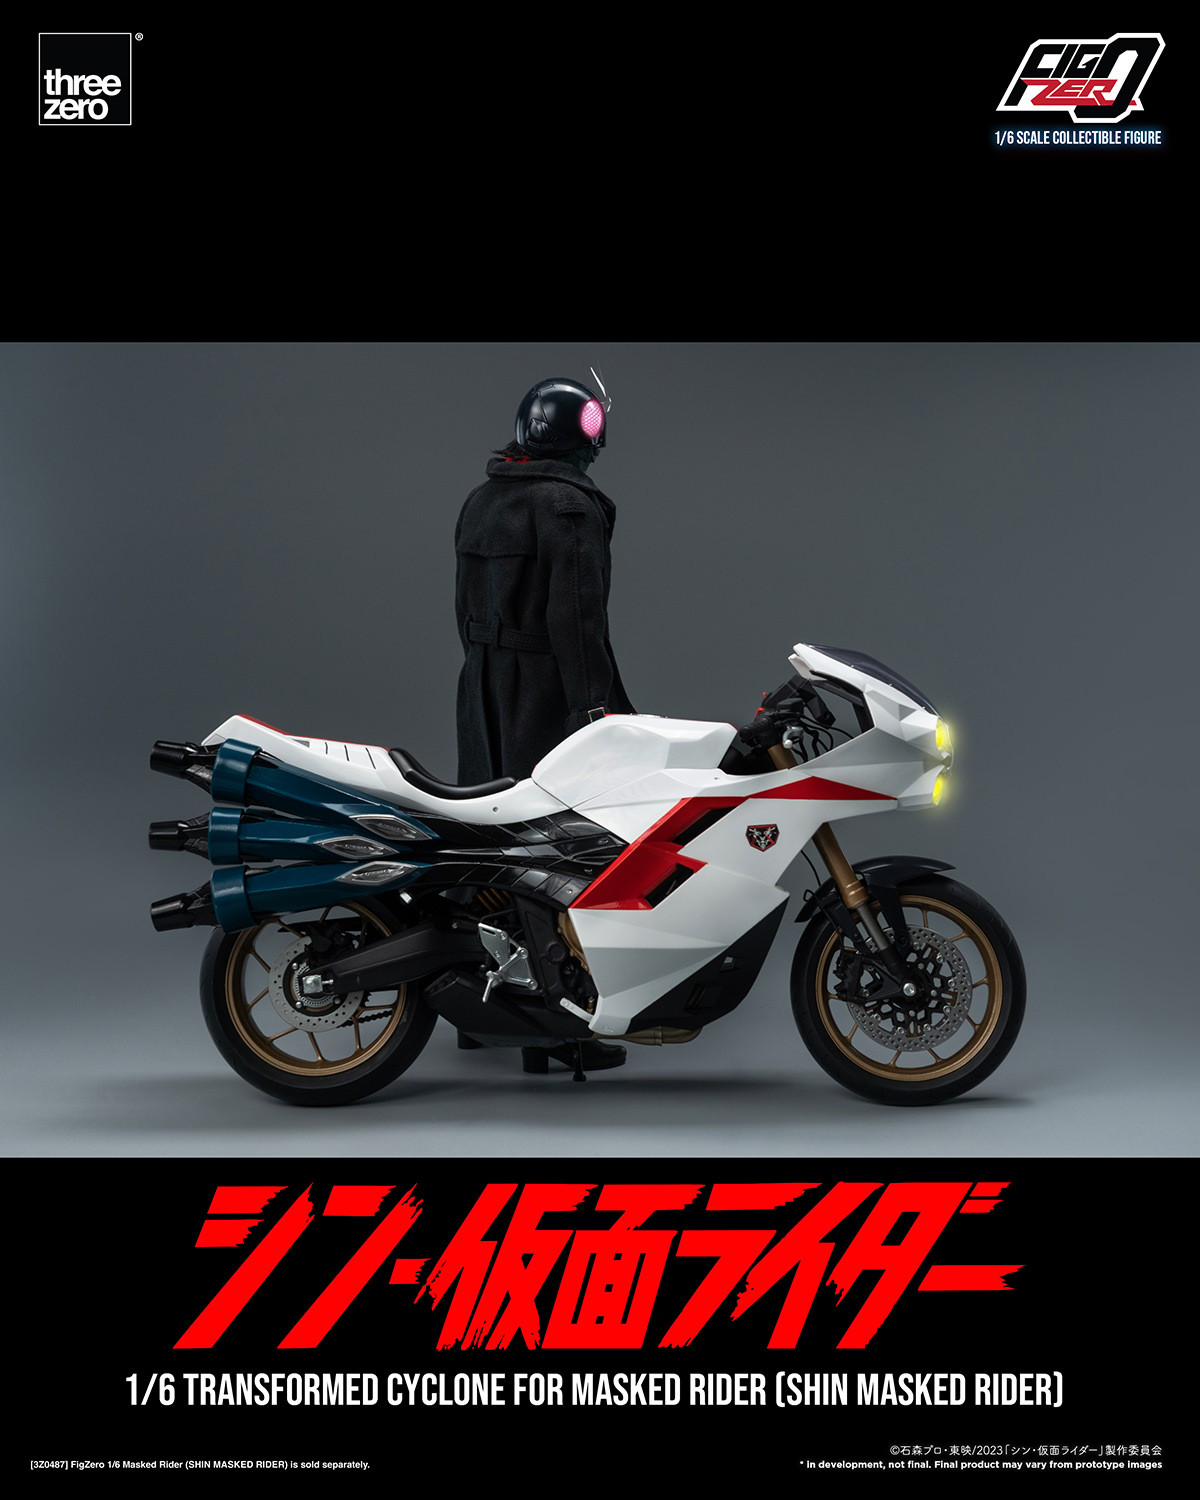 Transformed Cyclone for Masked Rider (Shin Masked Rider) (Prototype Shown) View 18